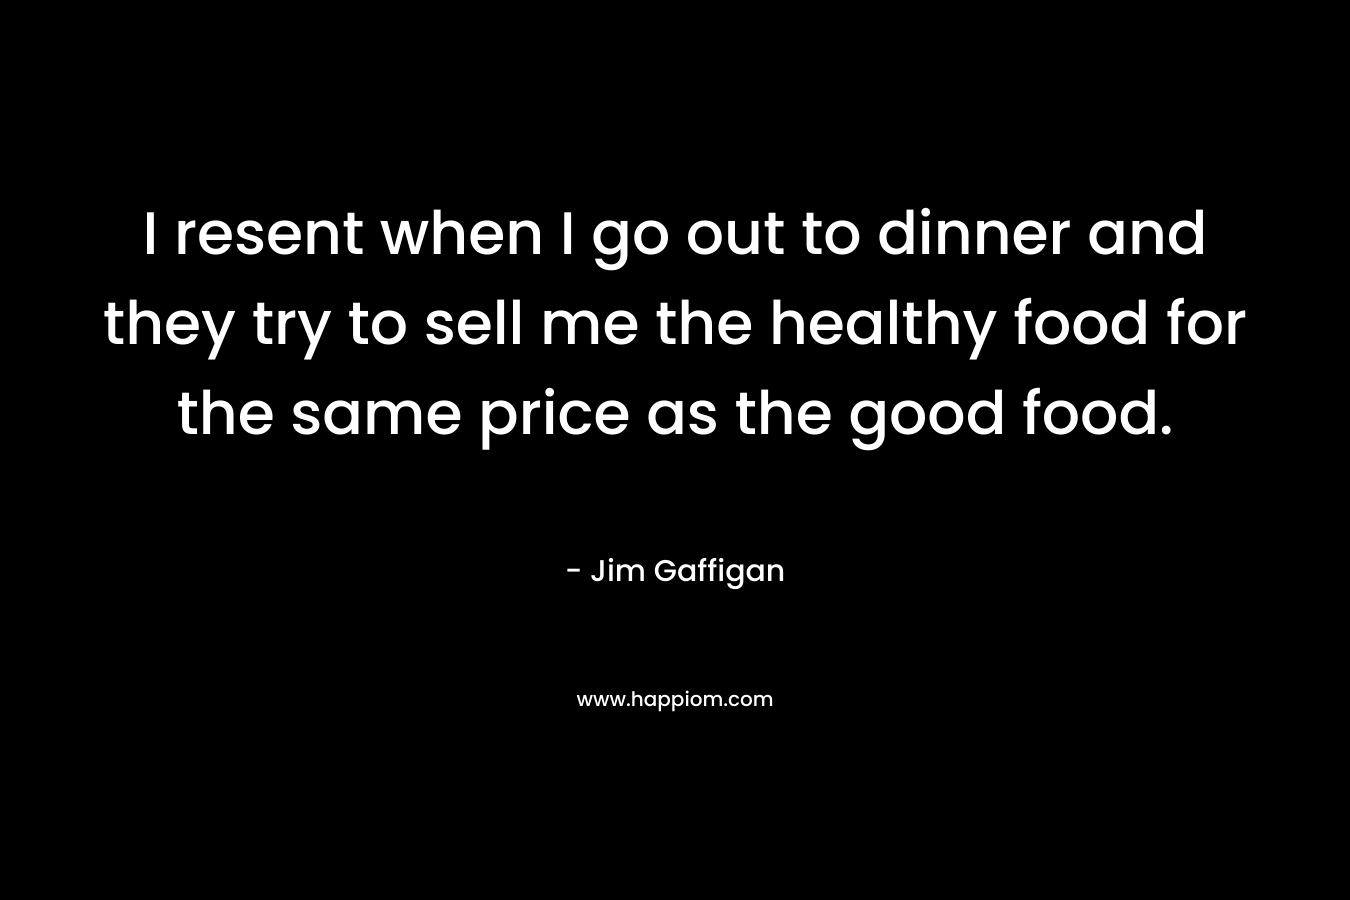 I resent when I go out to dinner and they try to sell me the healthy food for the same price as the good food. – Jim Gaffigan